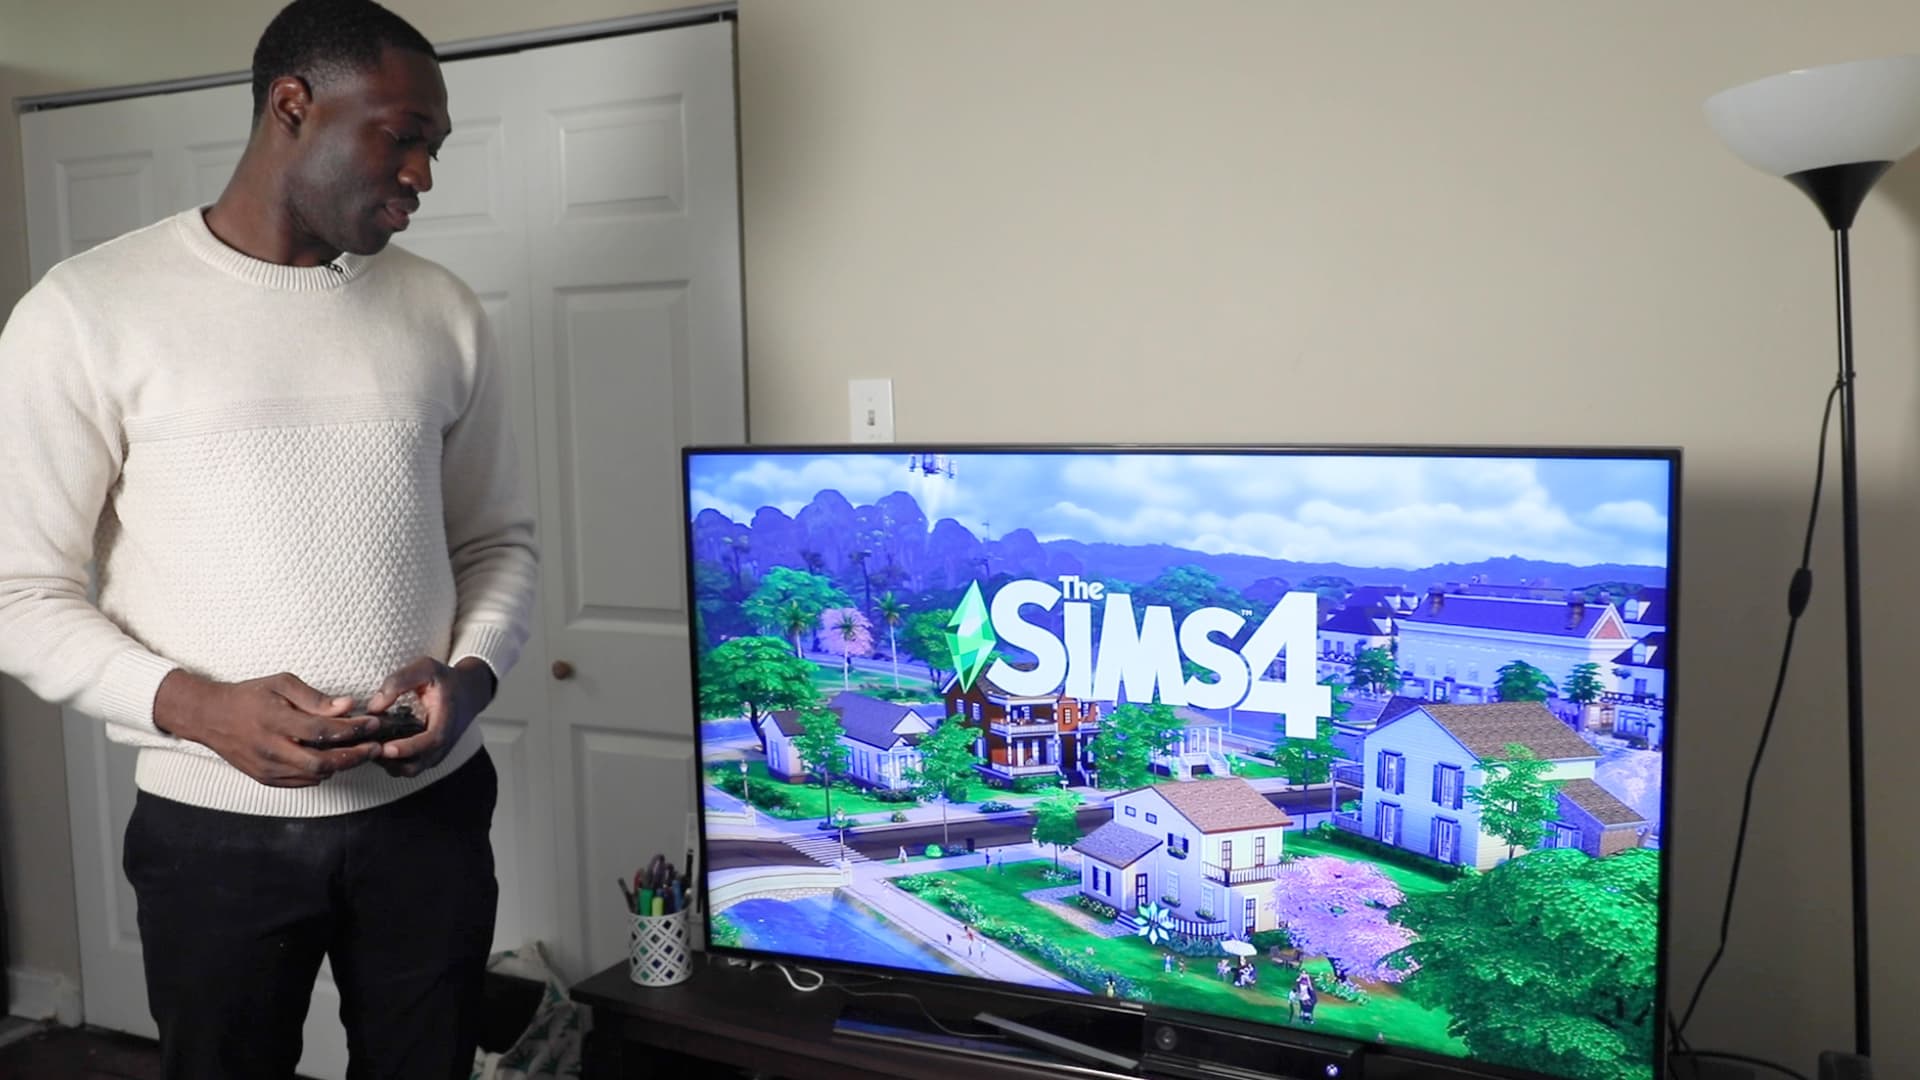 Roy Patterson plays the Sims for hours at a time with his girlfriend.